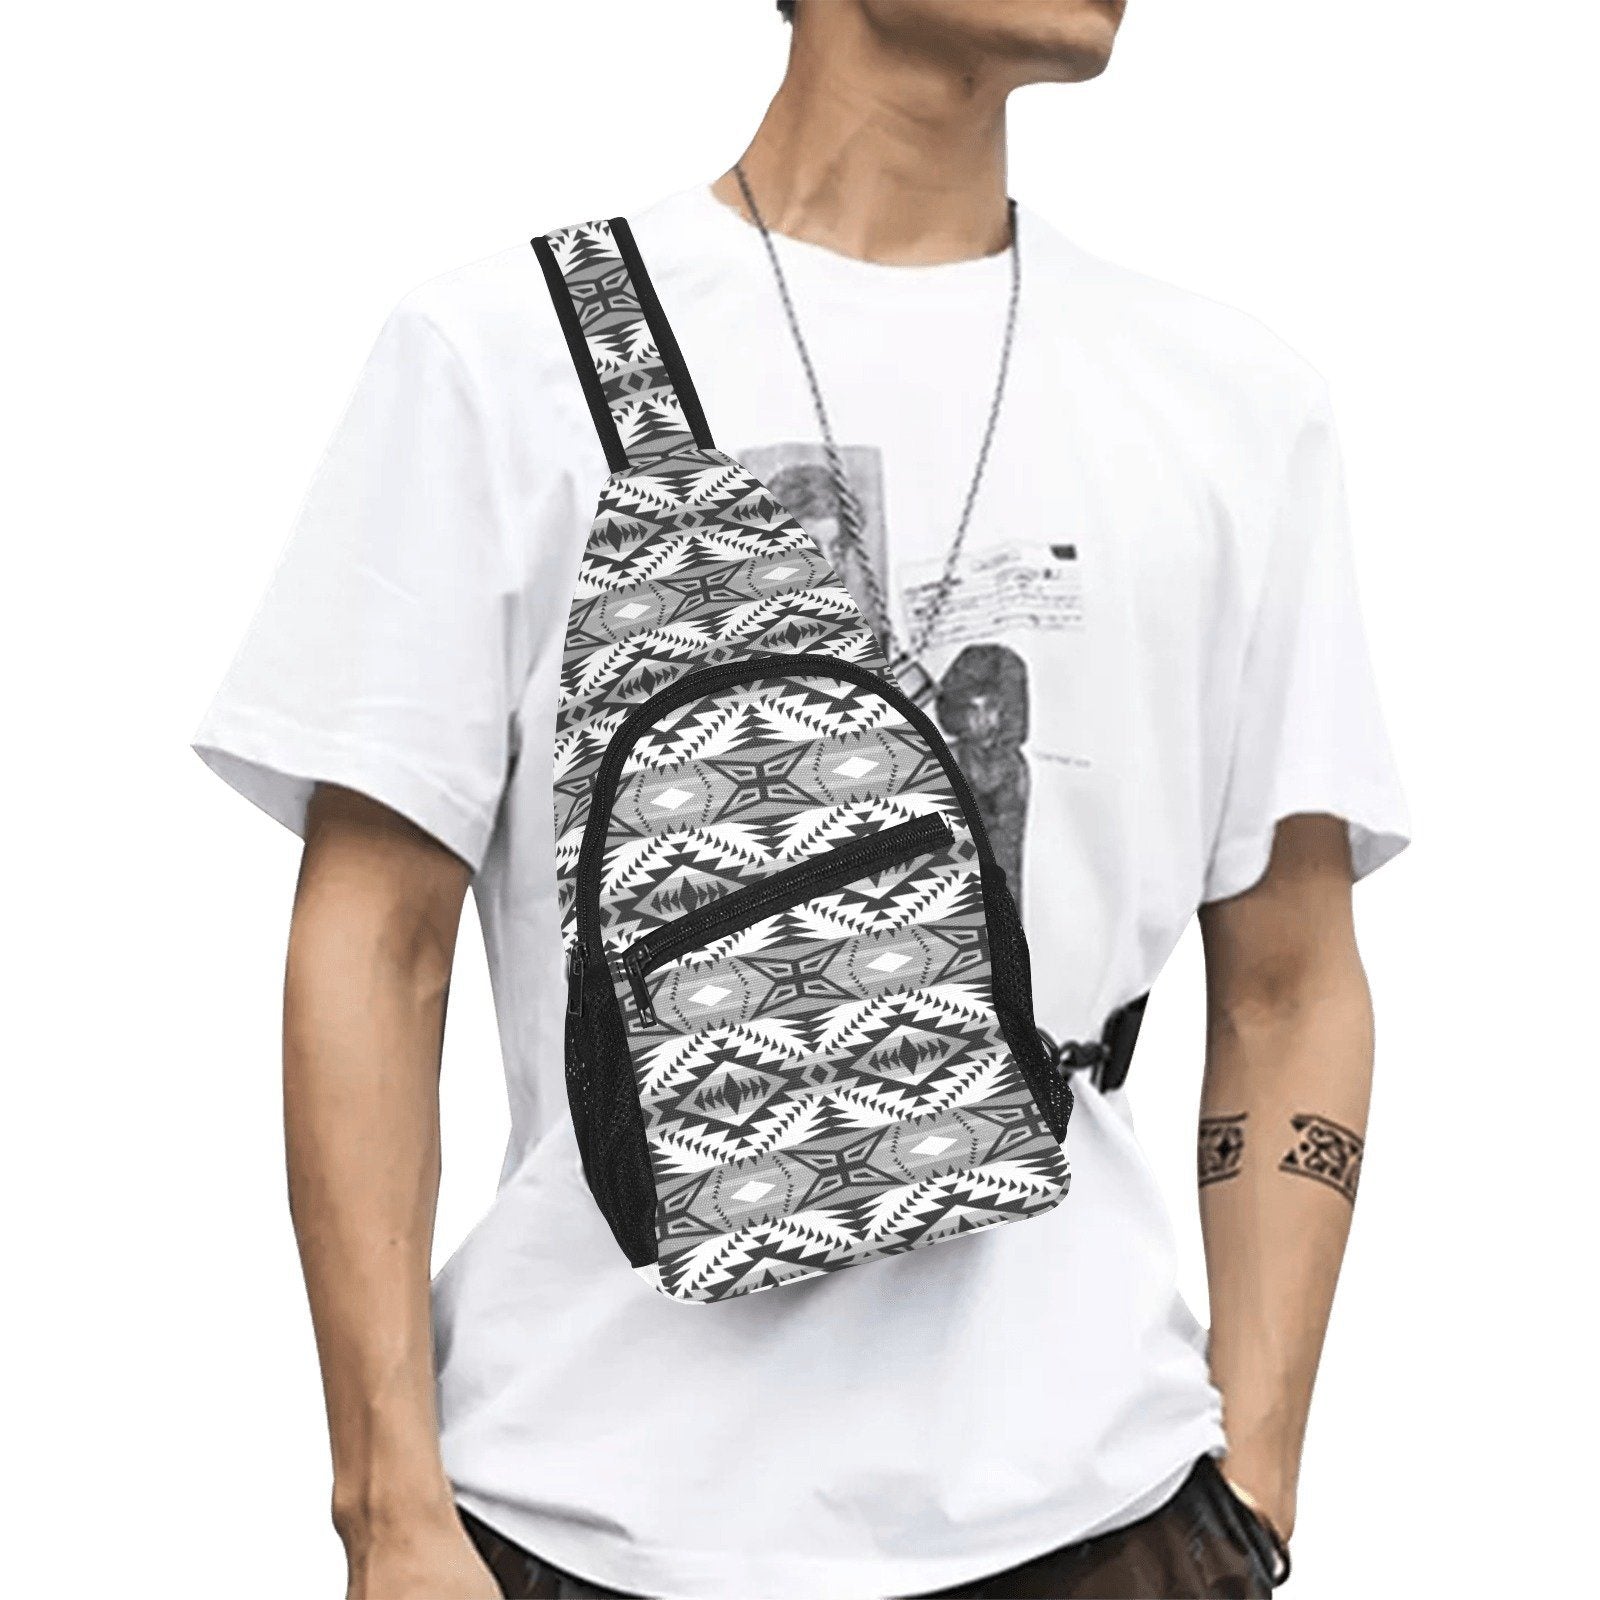 Mesa War Party All Over Print Chest Bag (Model 1719) All Over Print Chest Bag (1719) e-joyer 